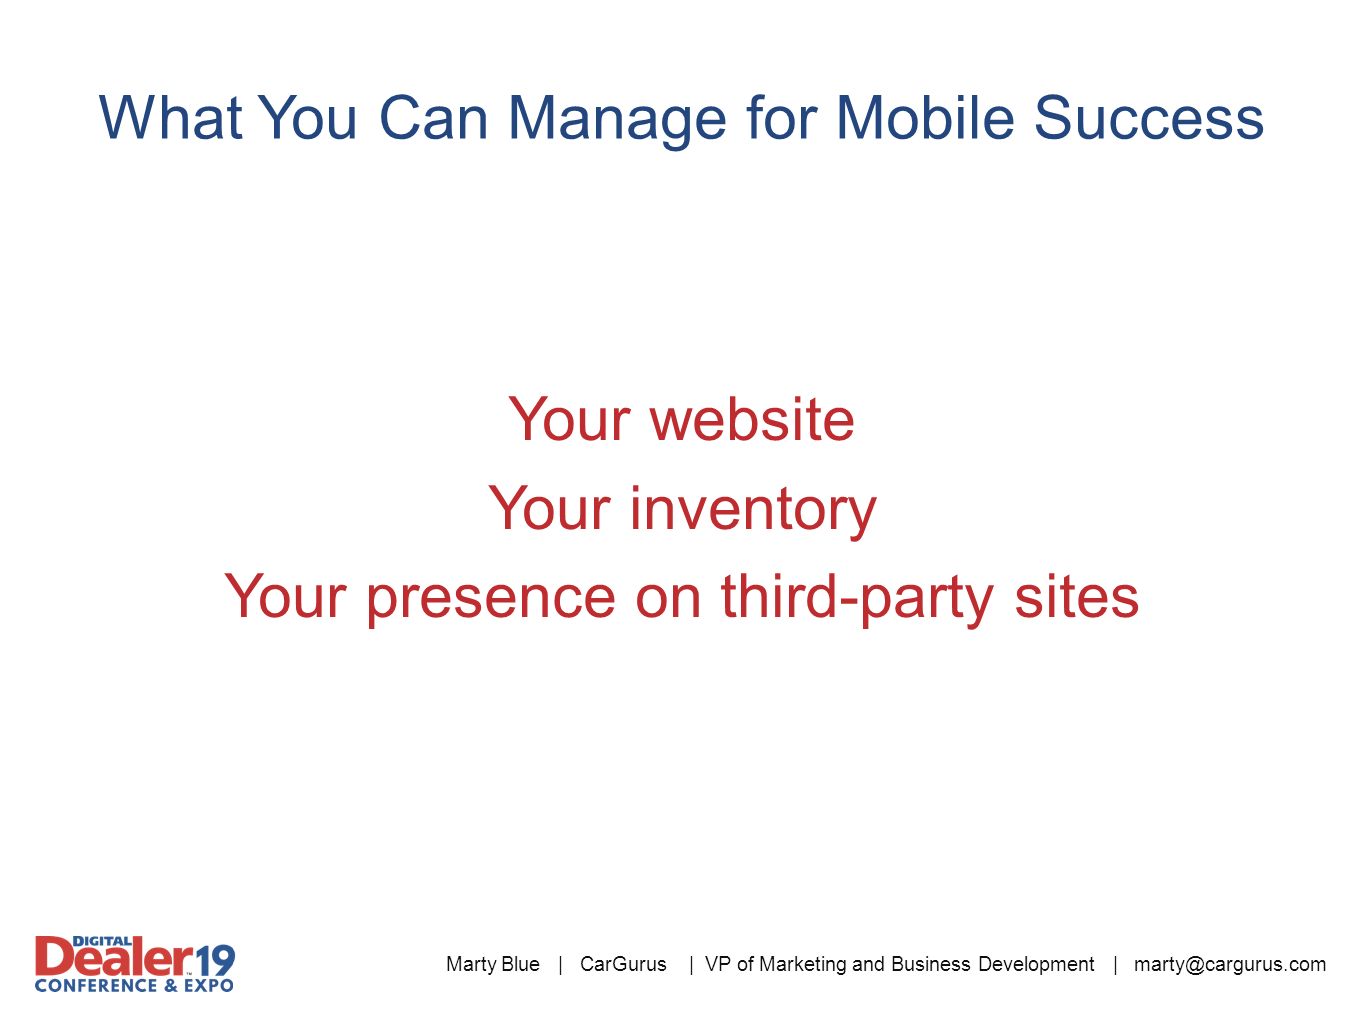 Marty Blue | CarGurus | VP of Marketing and Business Development | What You Can Manage for Mobile Success Your website Your inventory Your presence on third-party sites